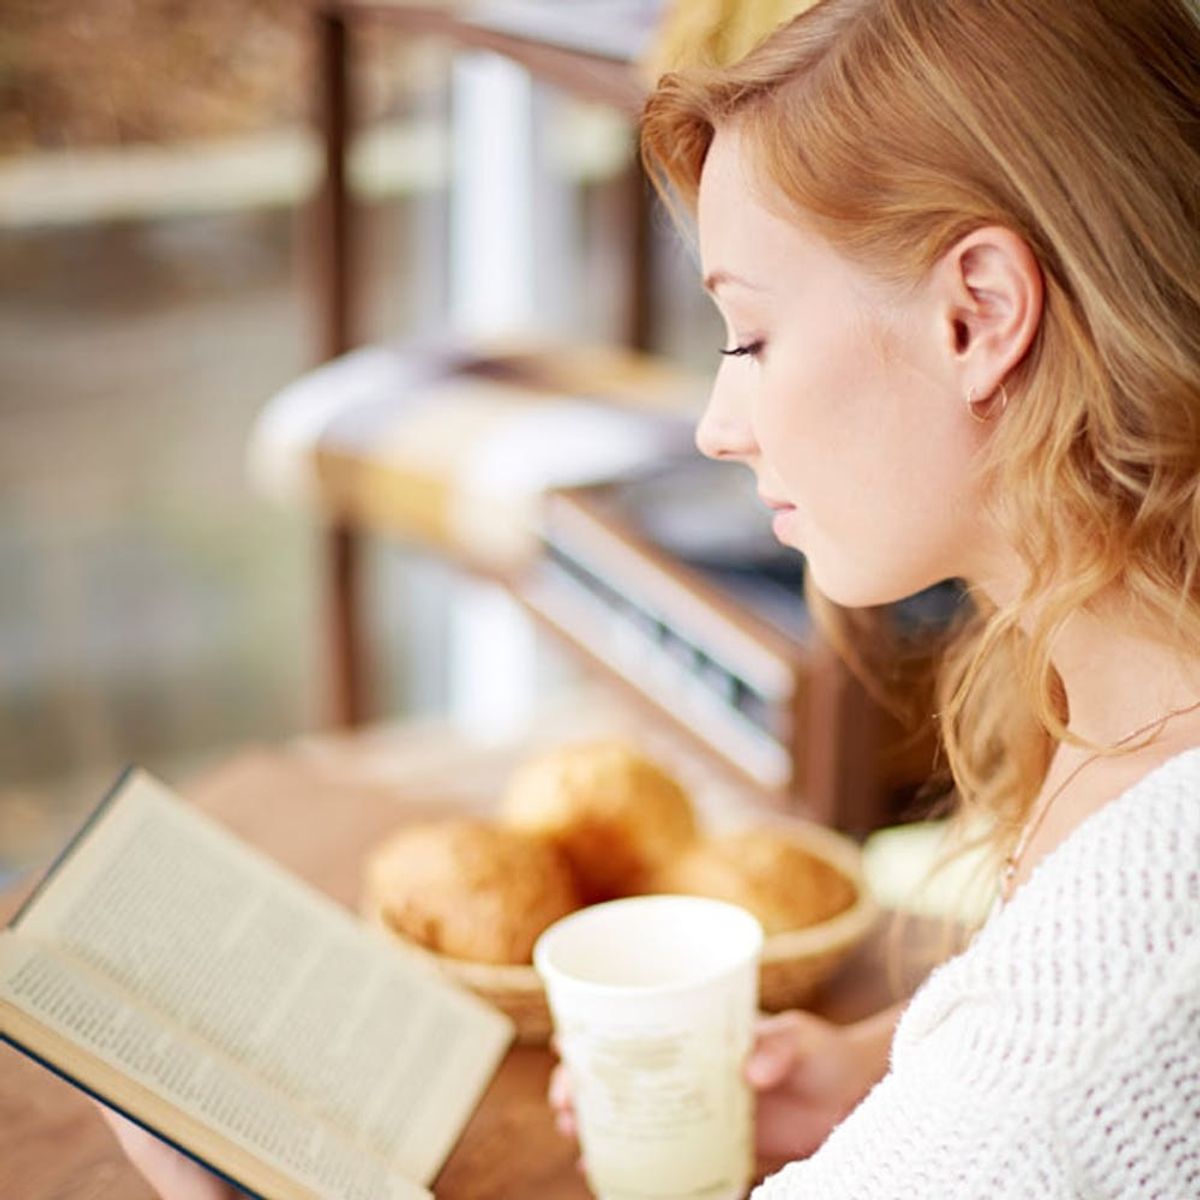 8 Books to Read Before Going Full-Time Freelance